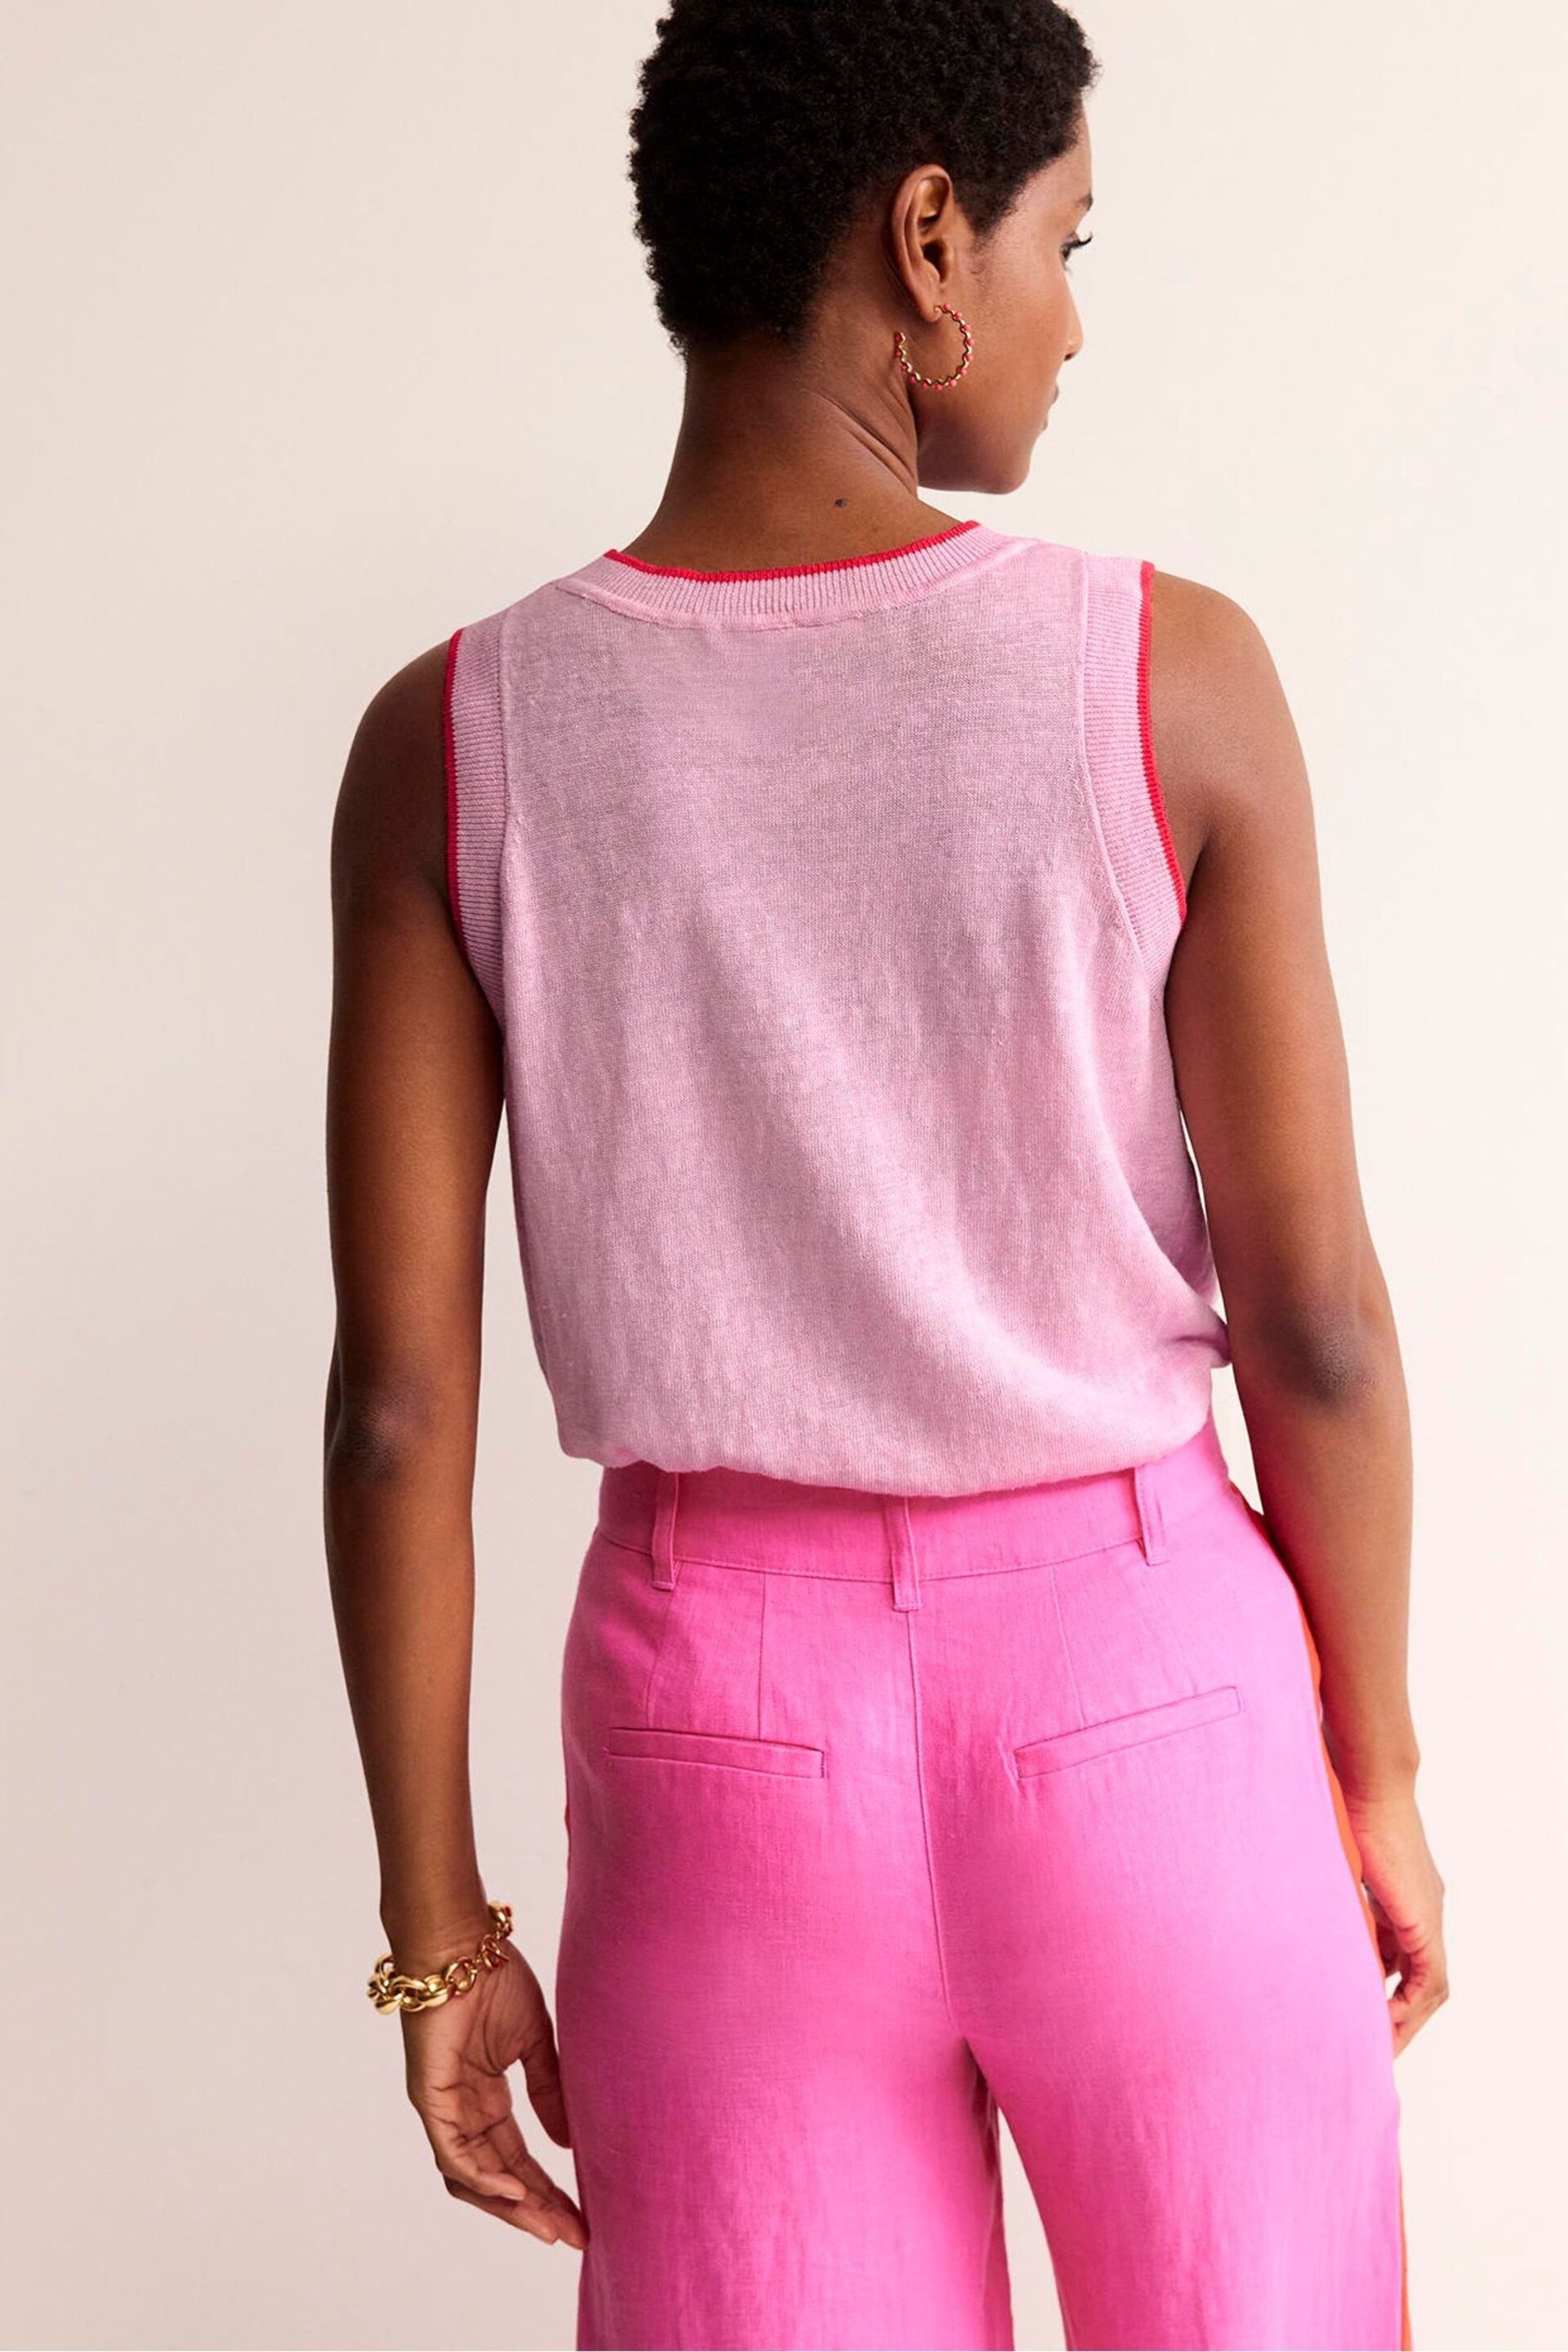 Boden Pink Maggie Linen Tank - Image 4 of 7